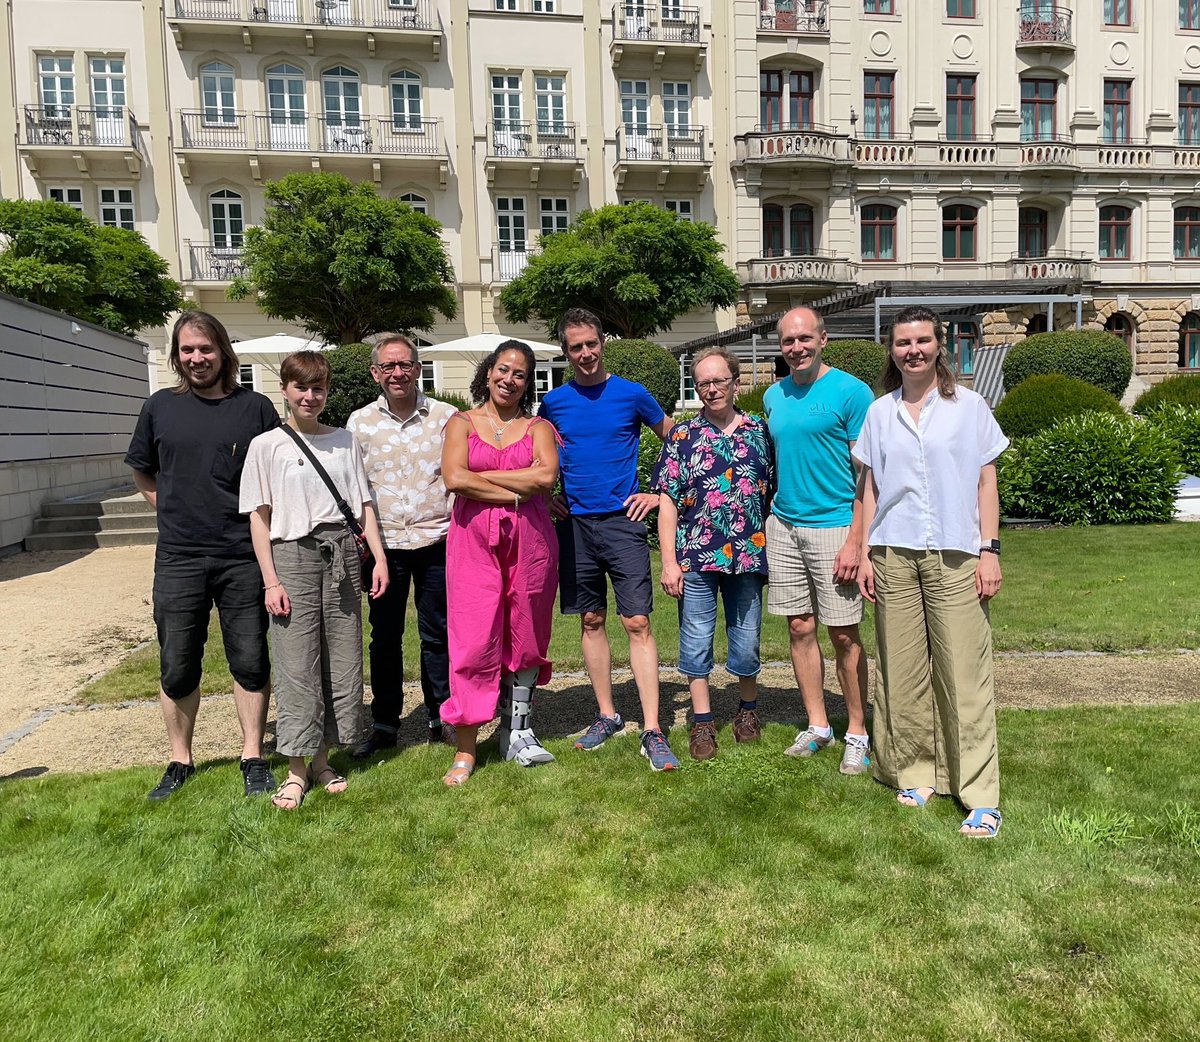 Wonderful #kickoff meeting of our @HFSP Program Grant in Bad Schandau. @redmakeda @Hejnol_Lab @HeisenbergCPLab and the talented people who join us on the quest to understand the role of #intermediate #filaments in Morphogenesis across the animal Phylogeny.